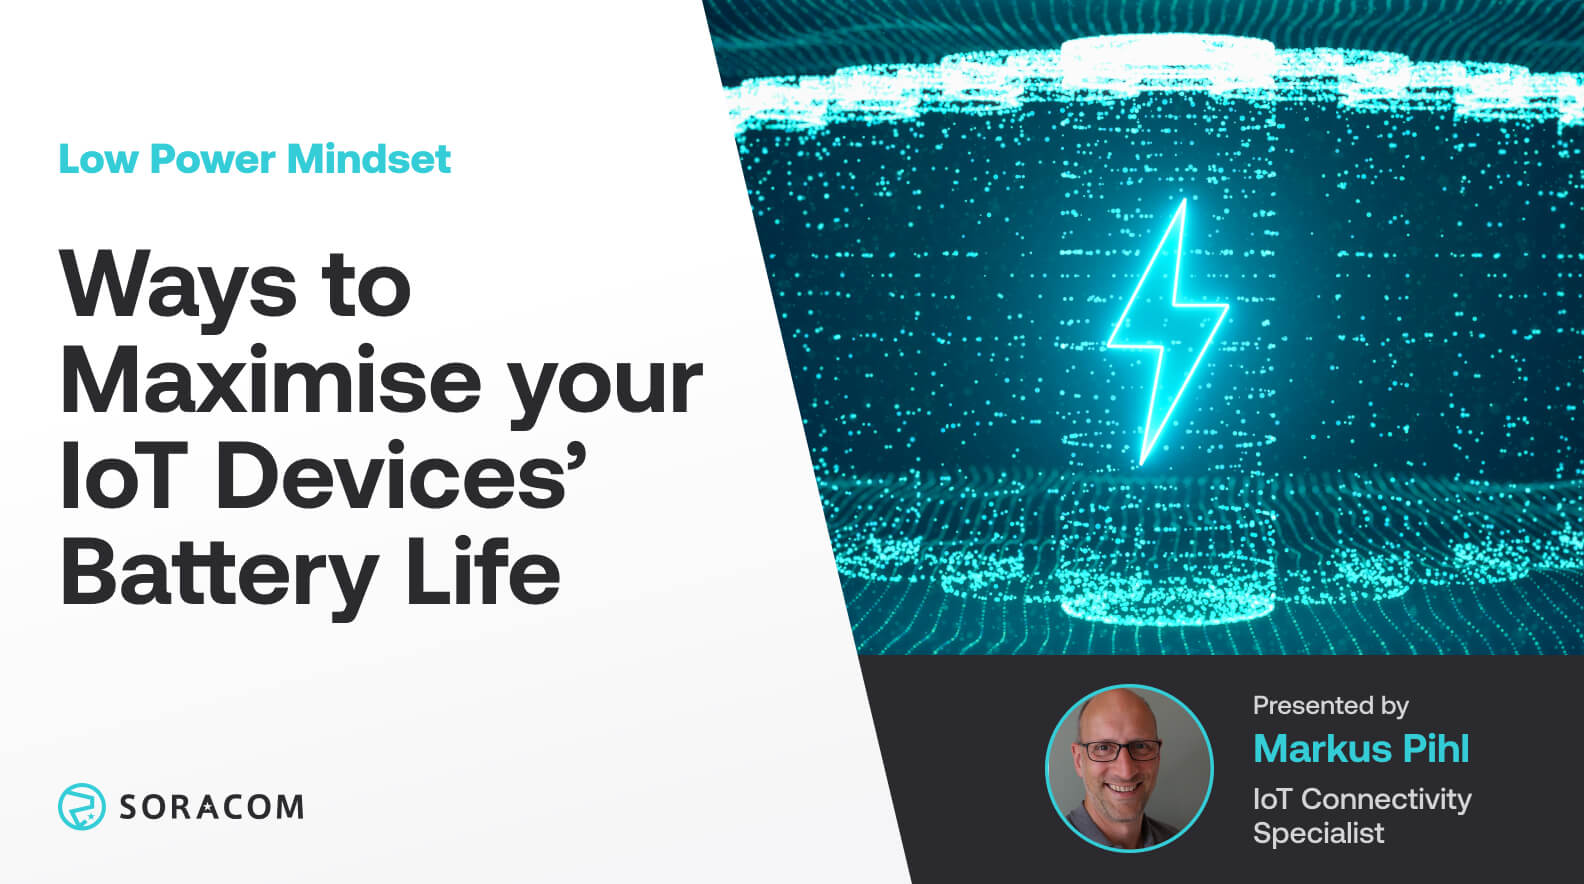 LOW POWER MINDSET: Ways to Maximise your IoT Devices’ Battery Life – More info